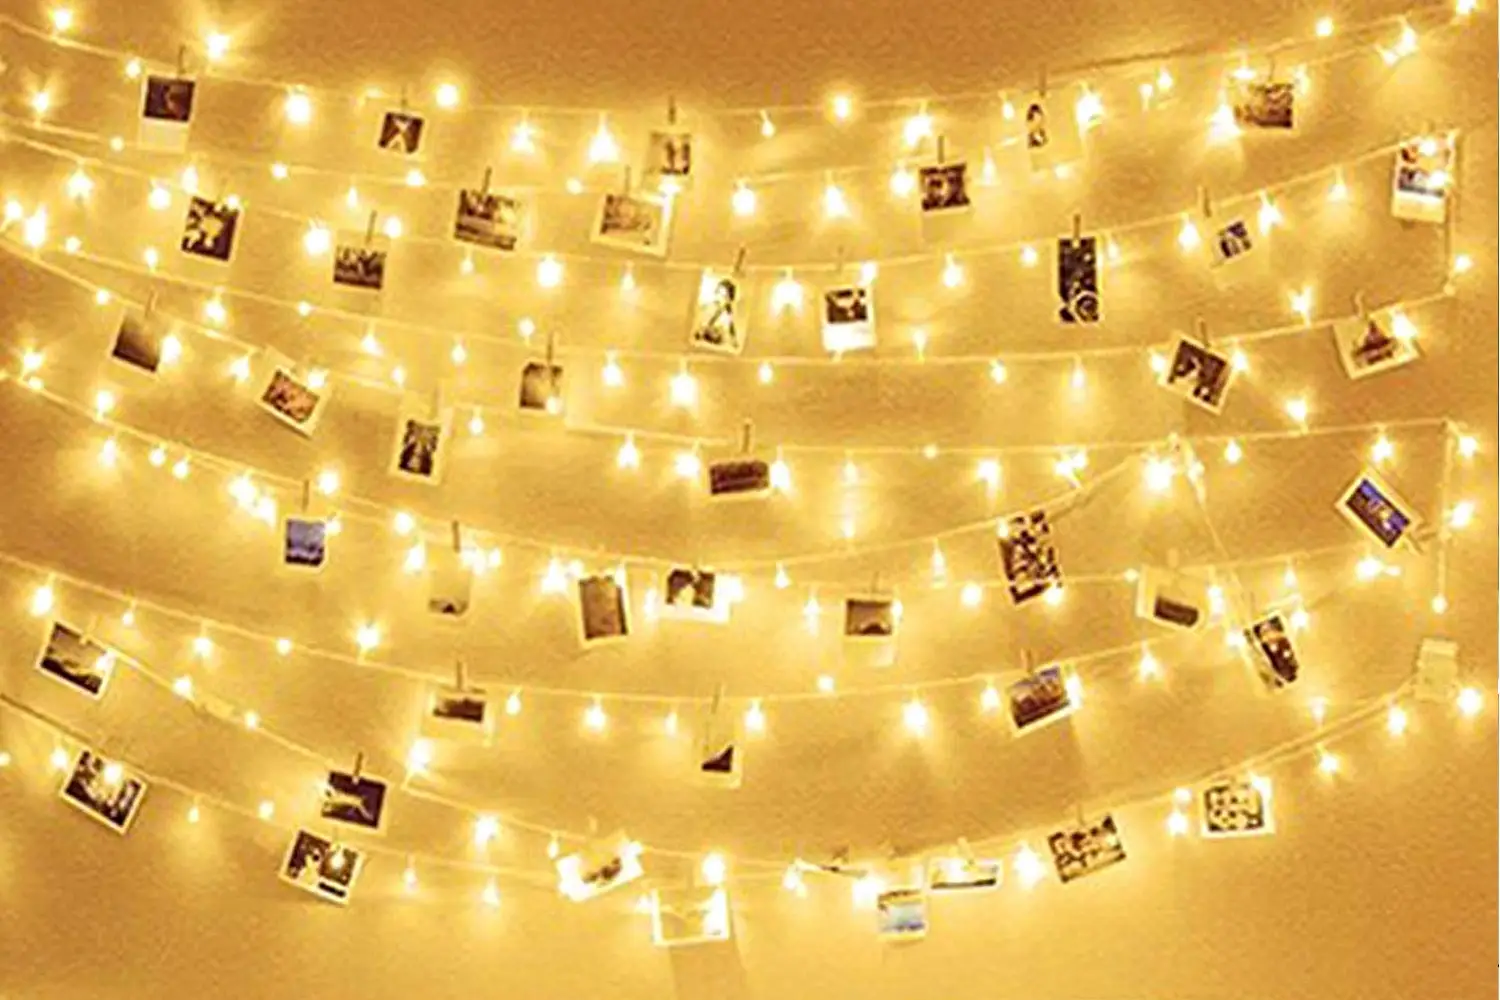 How To Hang Lights In Room Without Nails - Checkout These 11 Ideas!